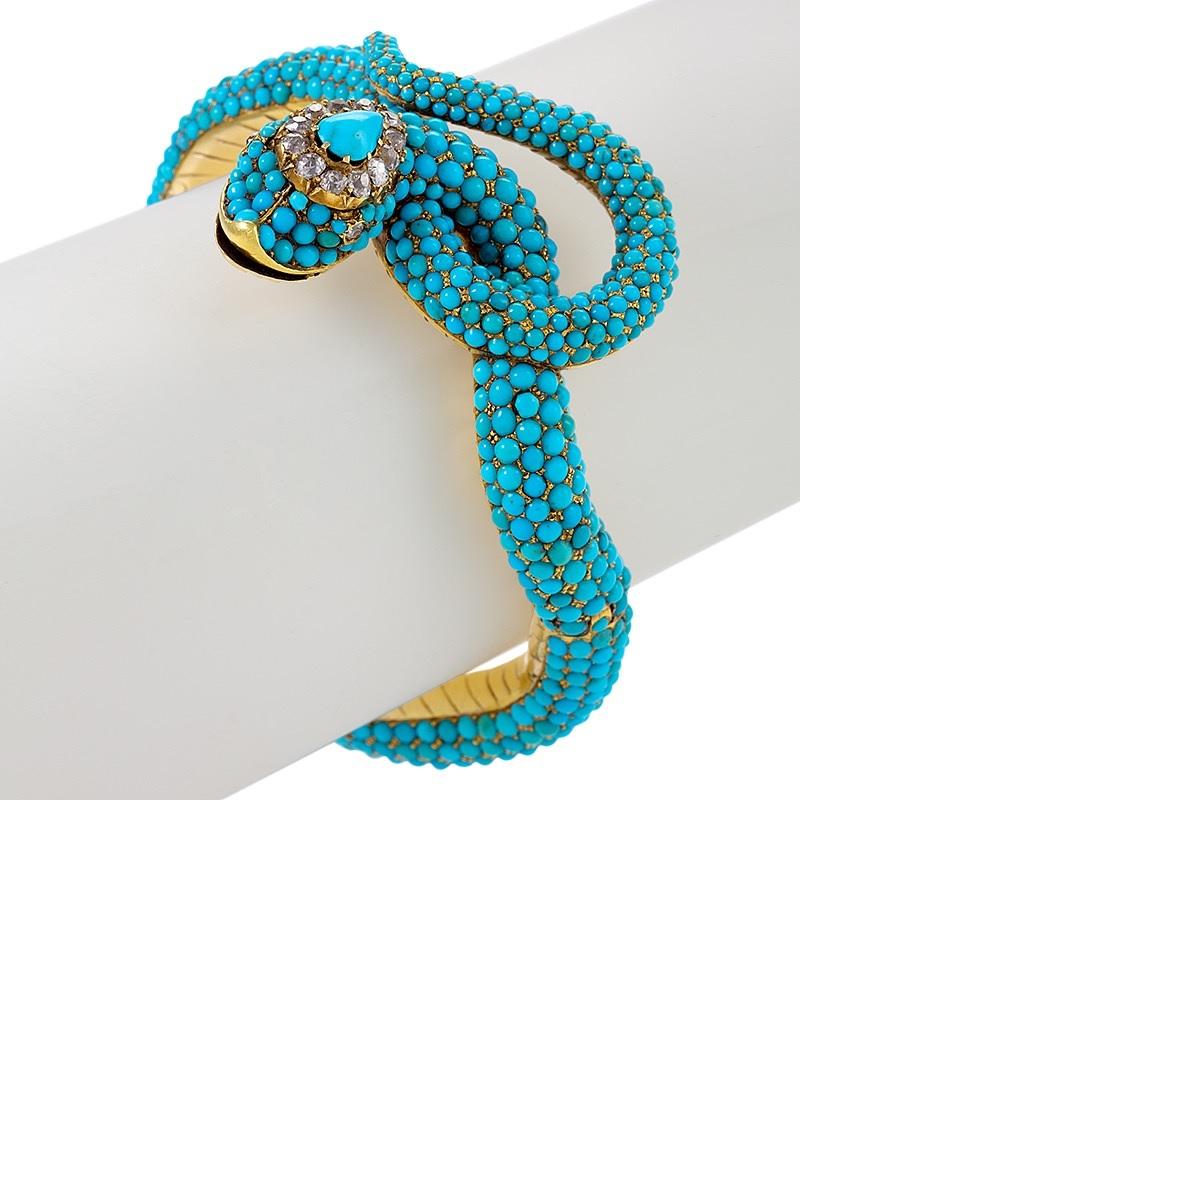 A Victorian 15 karat gold bracelet with turquoise and diamonds. This is a large bangle, to be worn either on the wrist or as an arm band, It has the form of a serpent dynamically wrapped upon itself and seemingly caught in motion, covered in